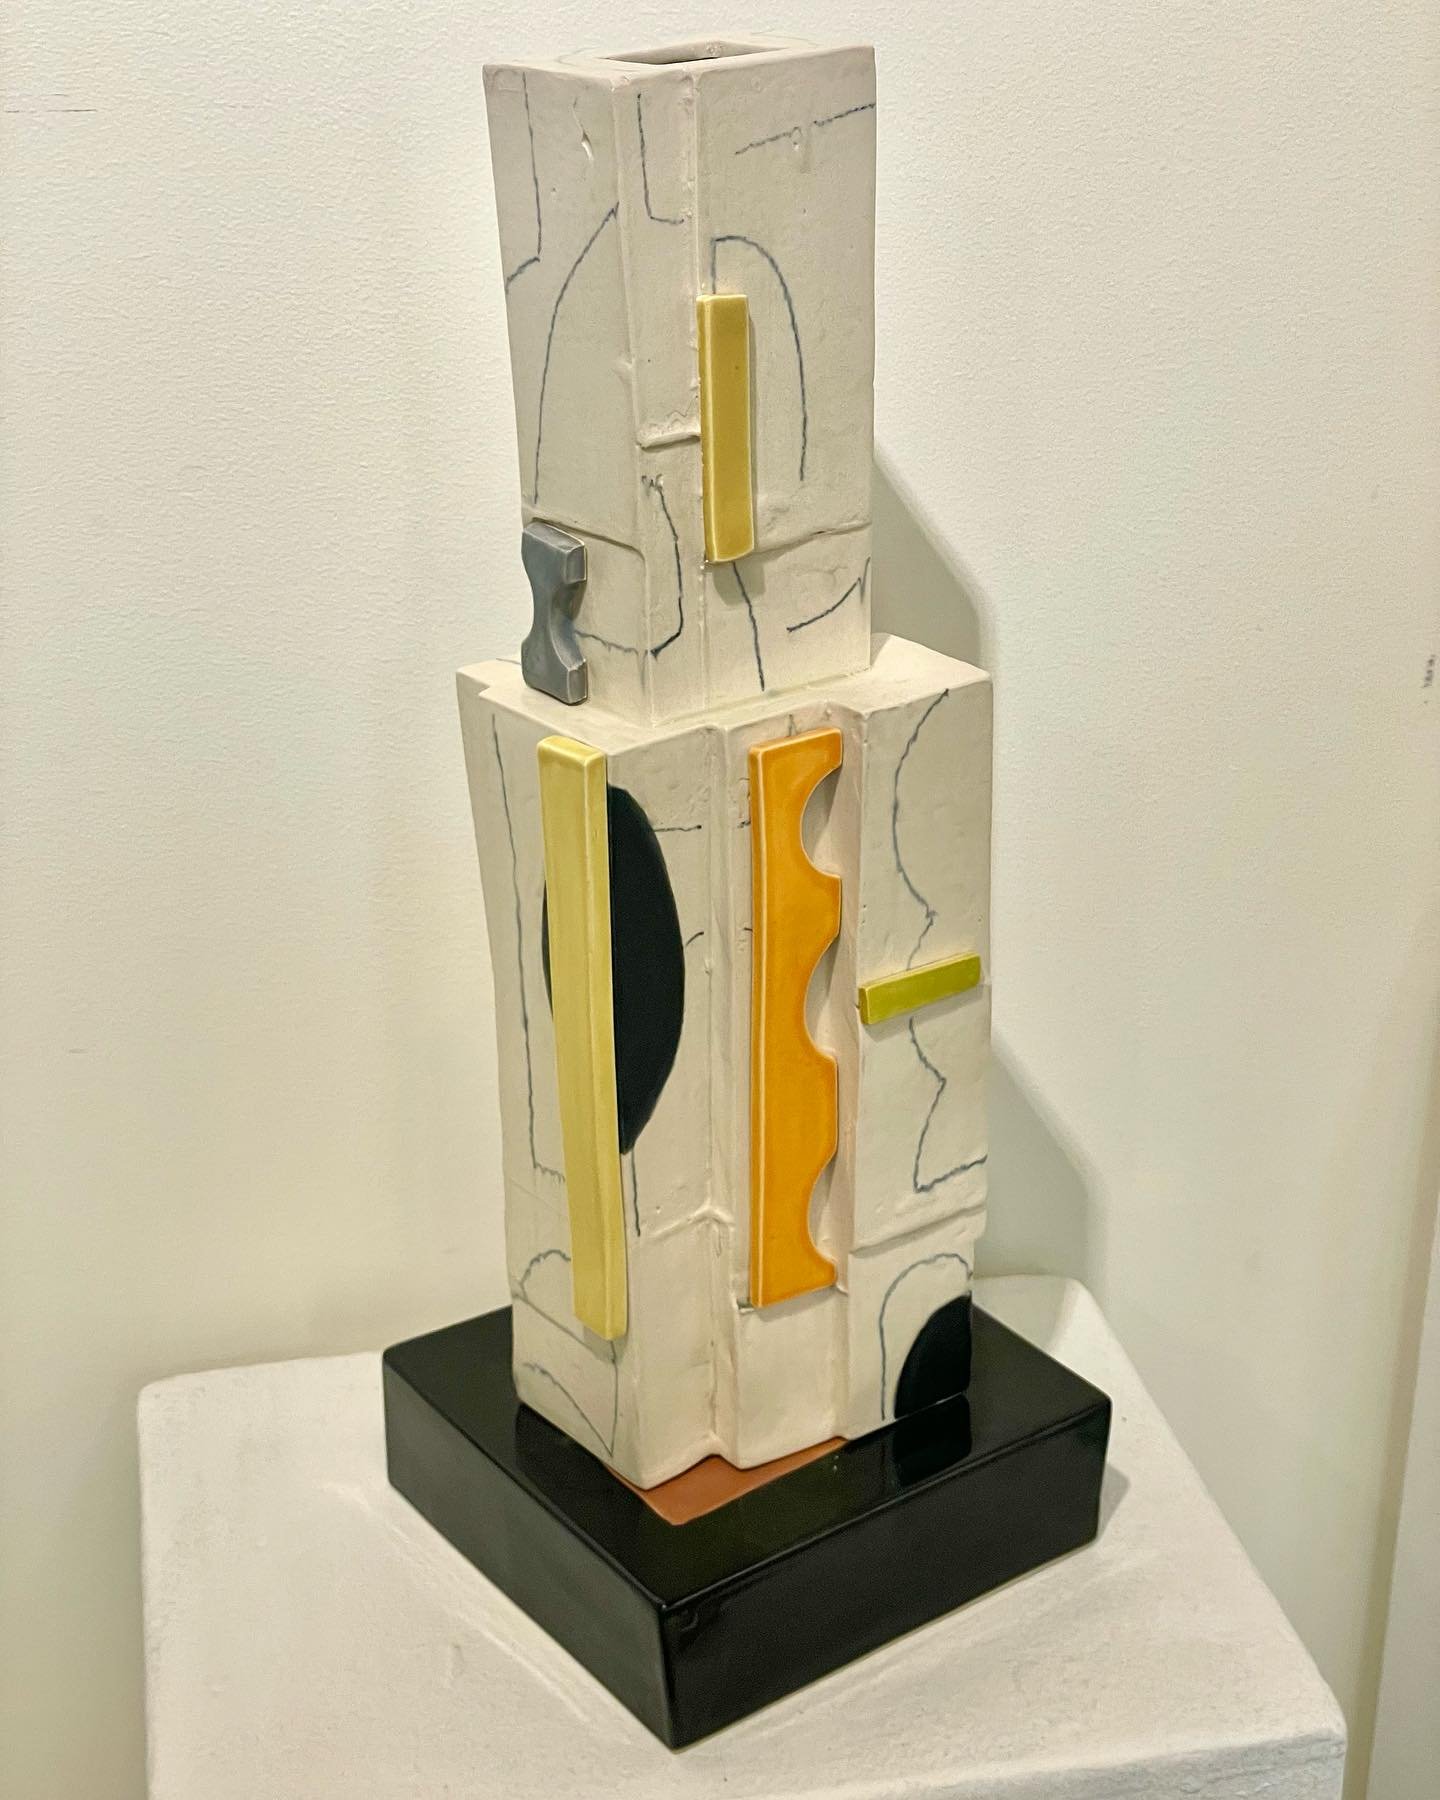 This large vase will be in The Spring Luncheon,May 2, at the Houston Center for Contemporary Craft Silent Auction of ceramic artworks, hand-picked by honorees, Garth Clark and Mark Del Vecchio.
The auction is online and there is also a Buy Now option